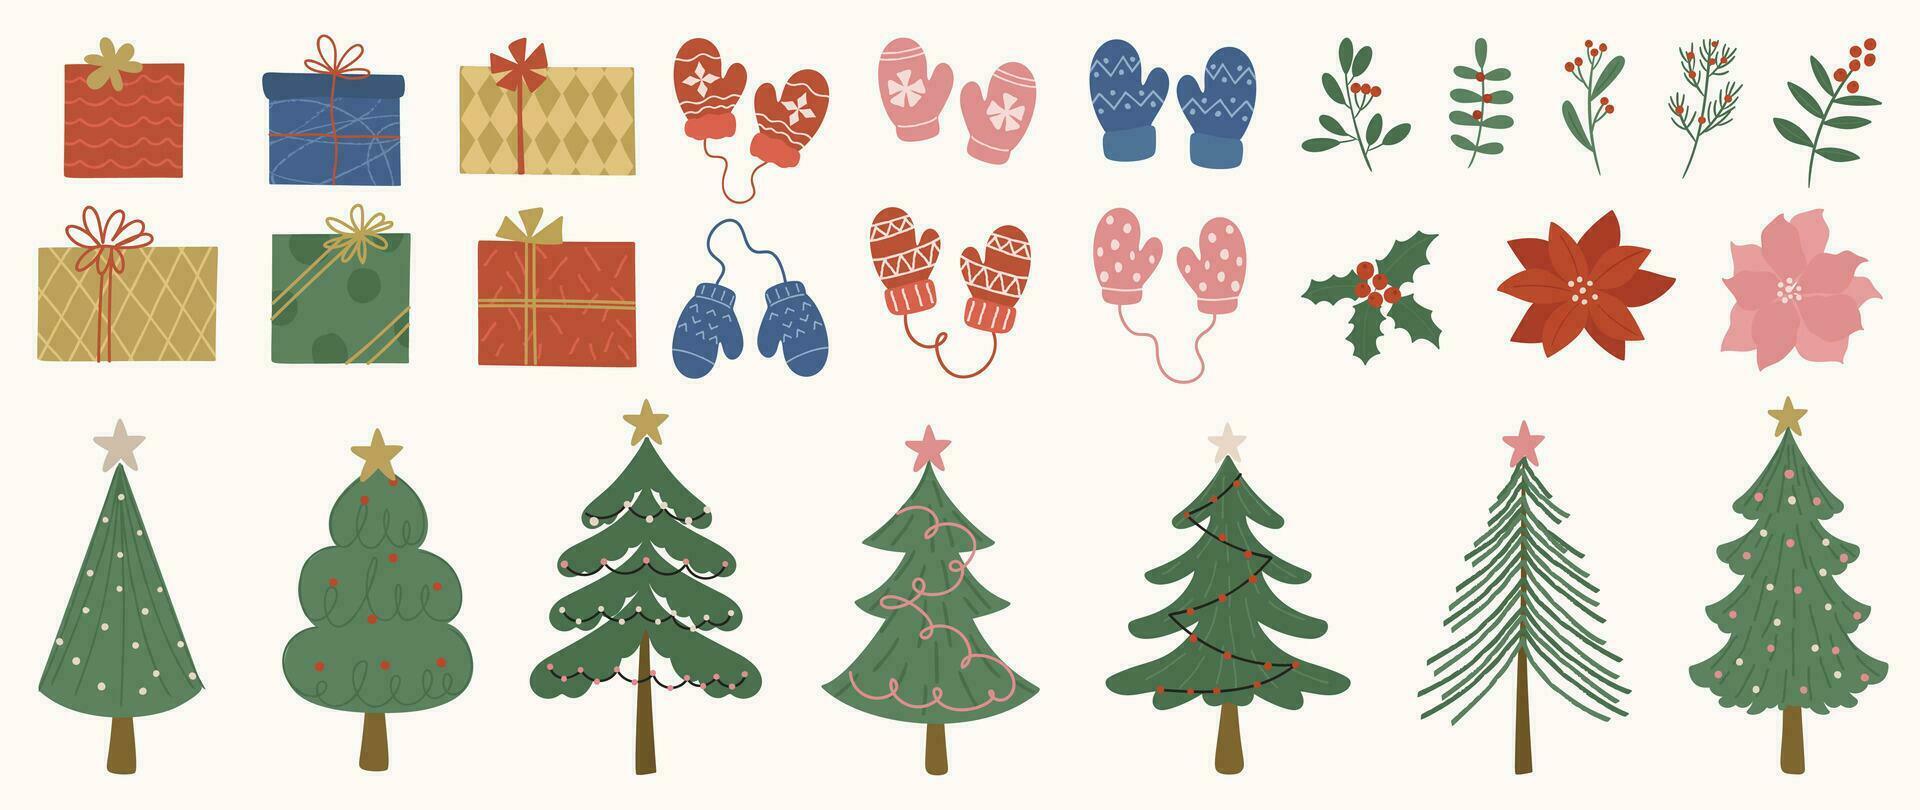 Set of decorative christmas element vector illustration. Collection of christmas tree, glove, present, flower, foliage. Design for sticker, card, poster, invitation, greeting.